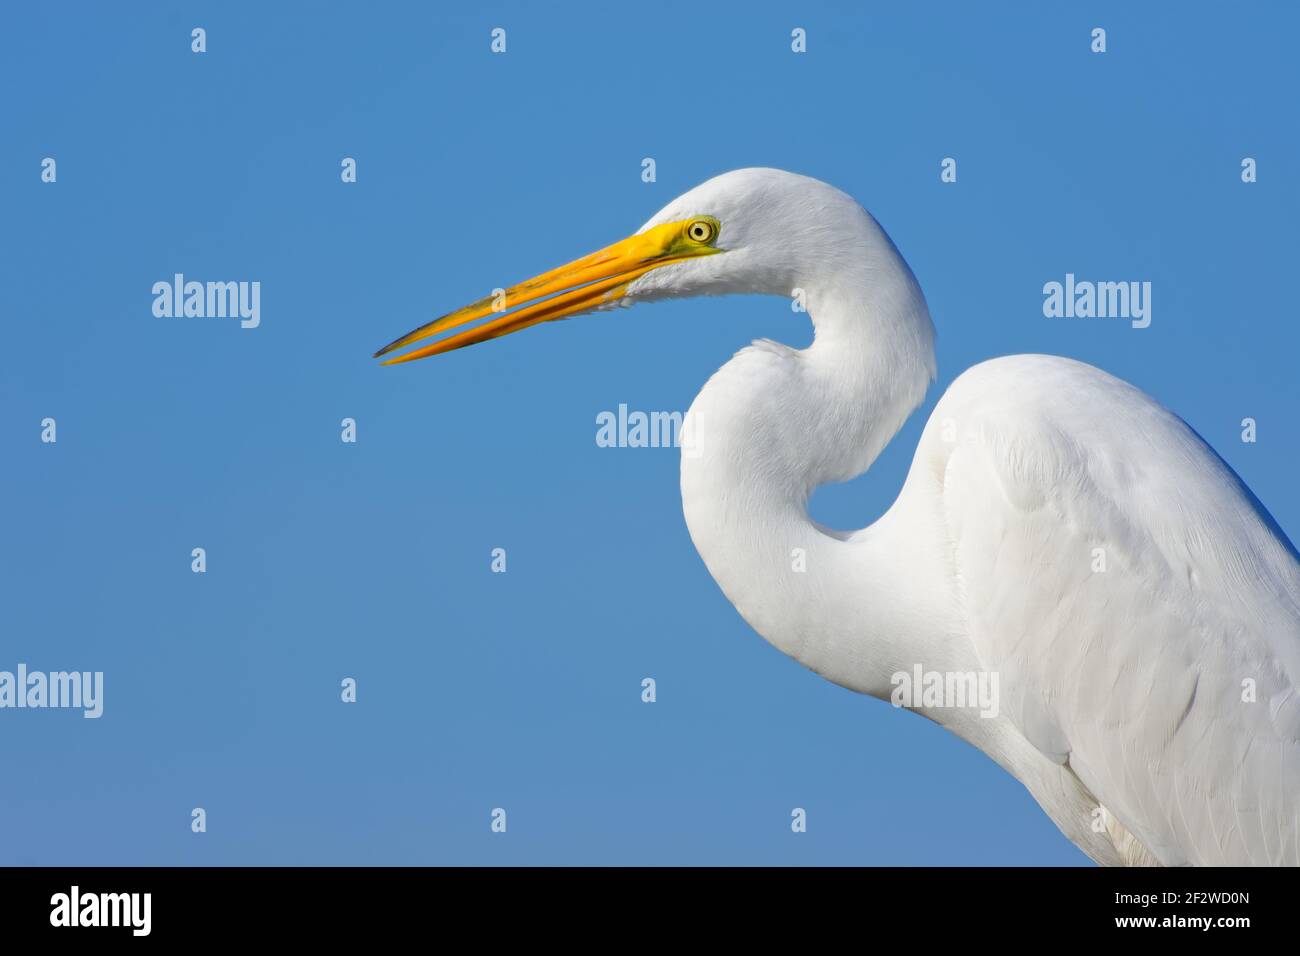 Close-up of a Great Egret Against a clear blue sky. Great Egrets were once hunted nearly to extinction for their beautiful feathers. Stock Photo